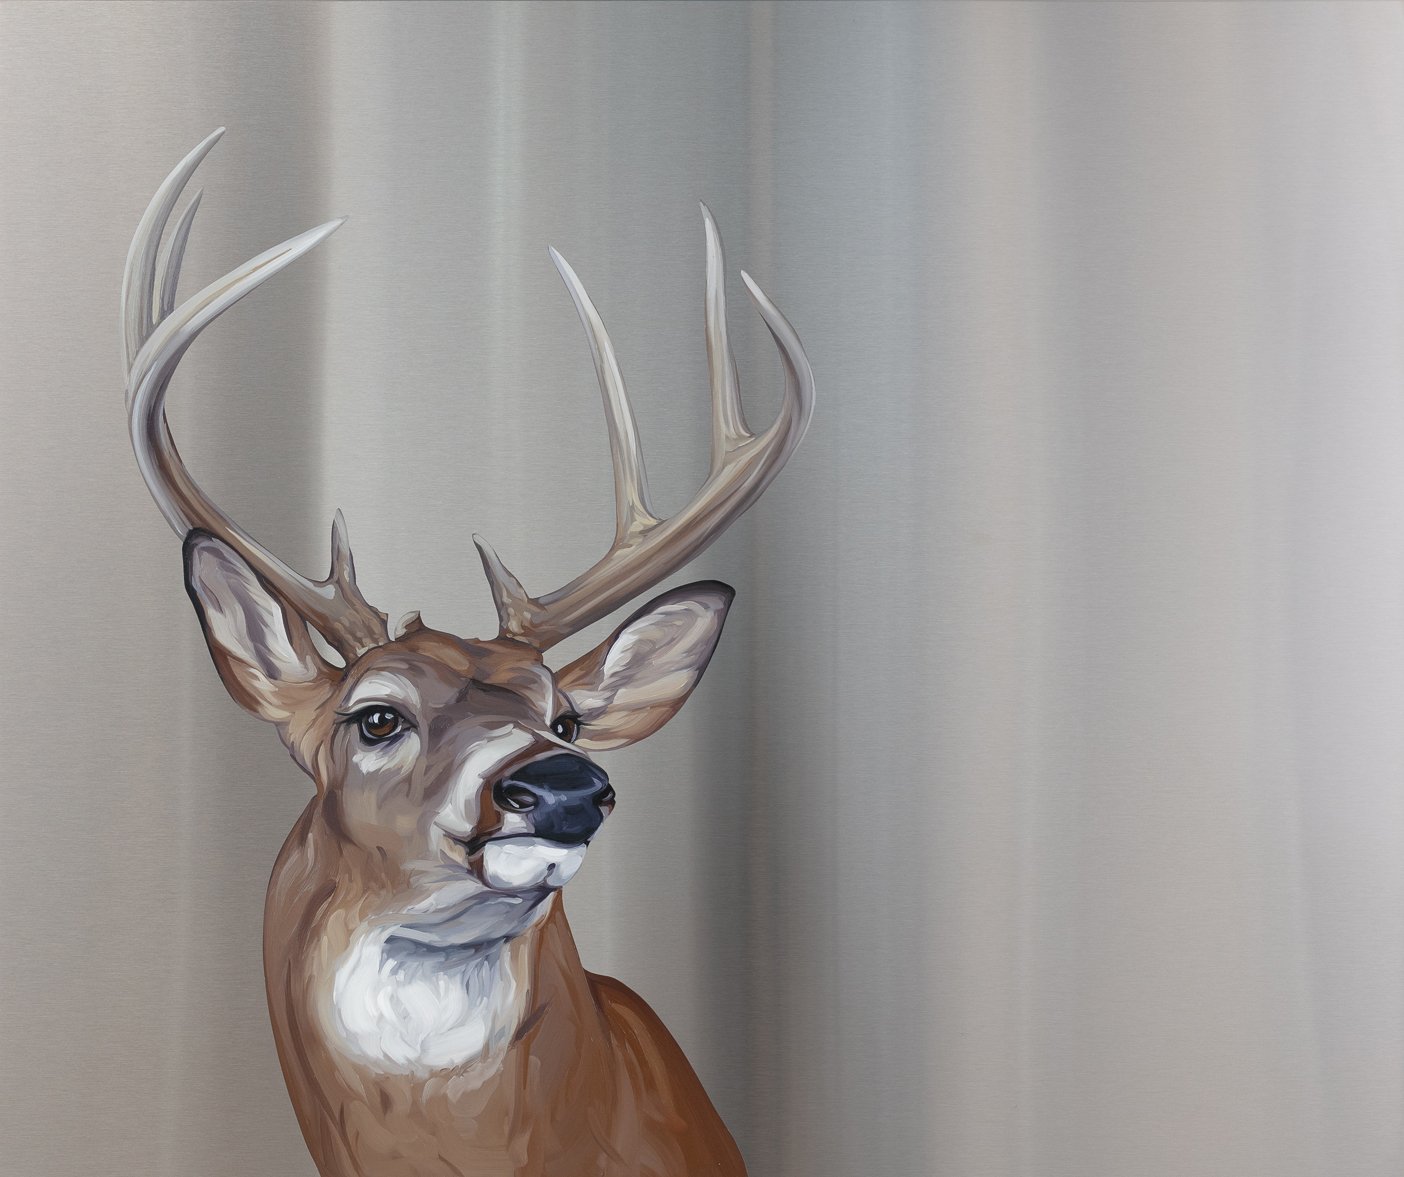  Whitetail Deer. Oil on stainless steel, 30in x 36in 